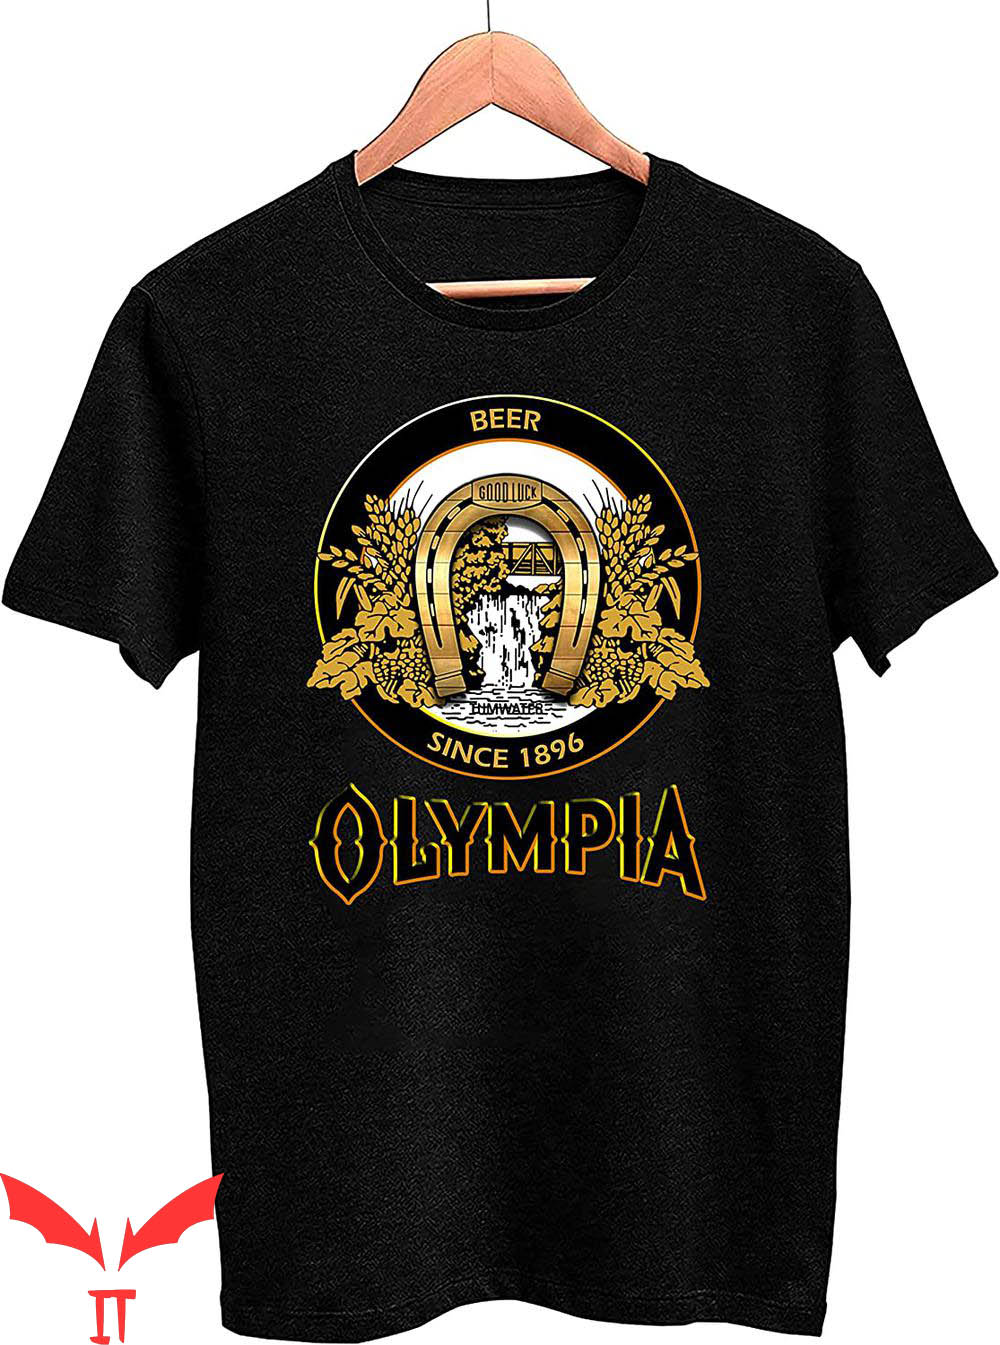 Olympia Beer T-Shirt Vintage Brewing Company Classic